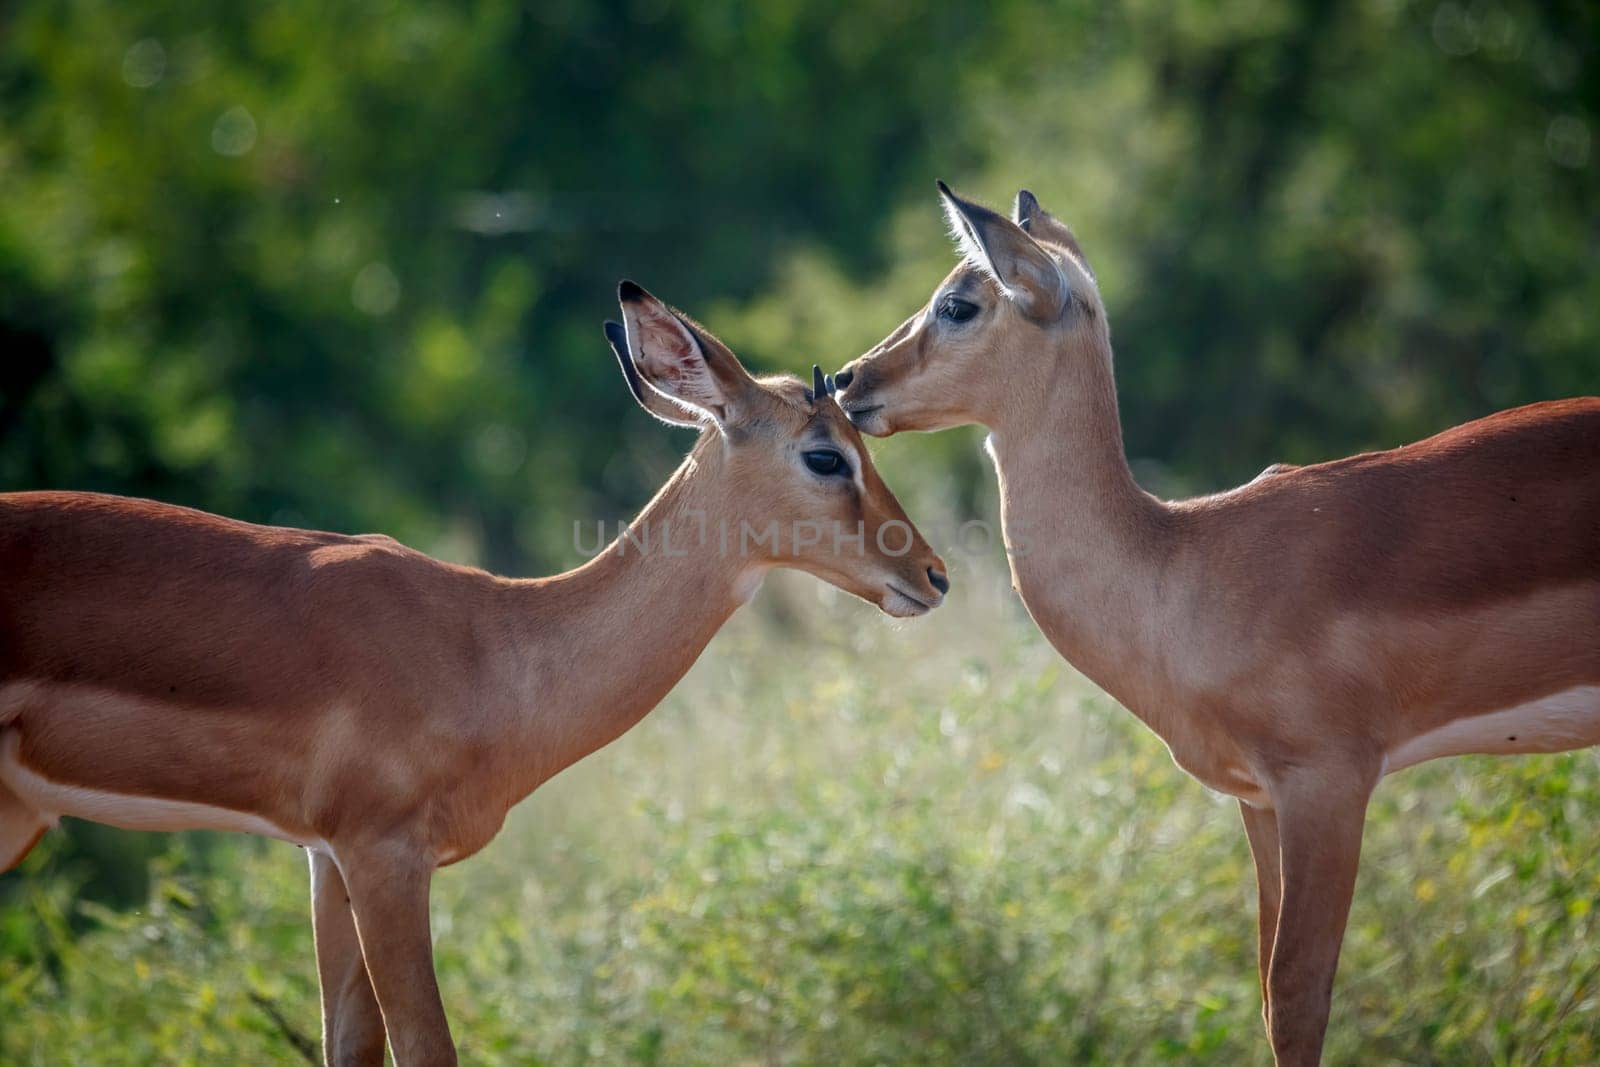 Two young Common Impala bonding in Kruger National park, South Africa ; Specie Aepyceros melampus family of Bovidae